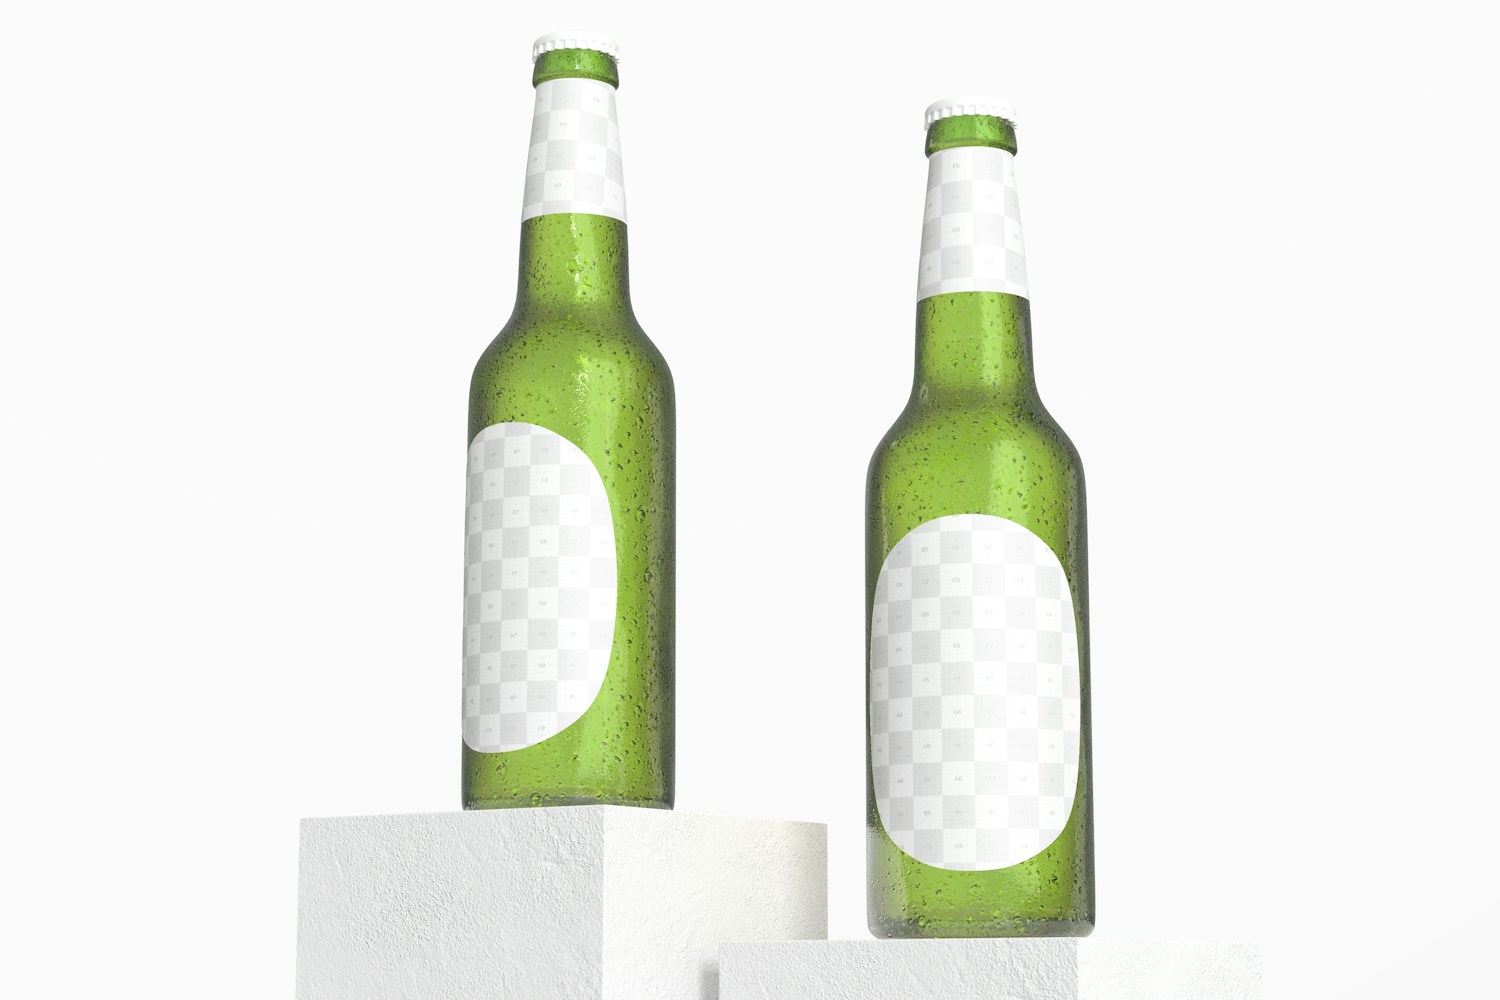 Green Beer Bottles Mockup, Low Angle View